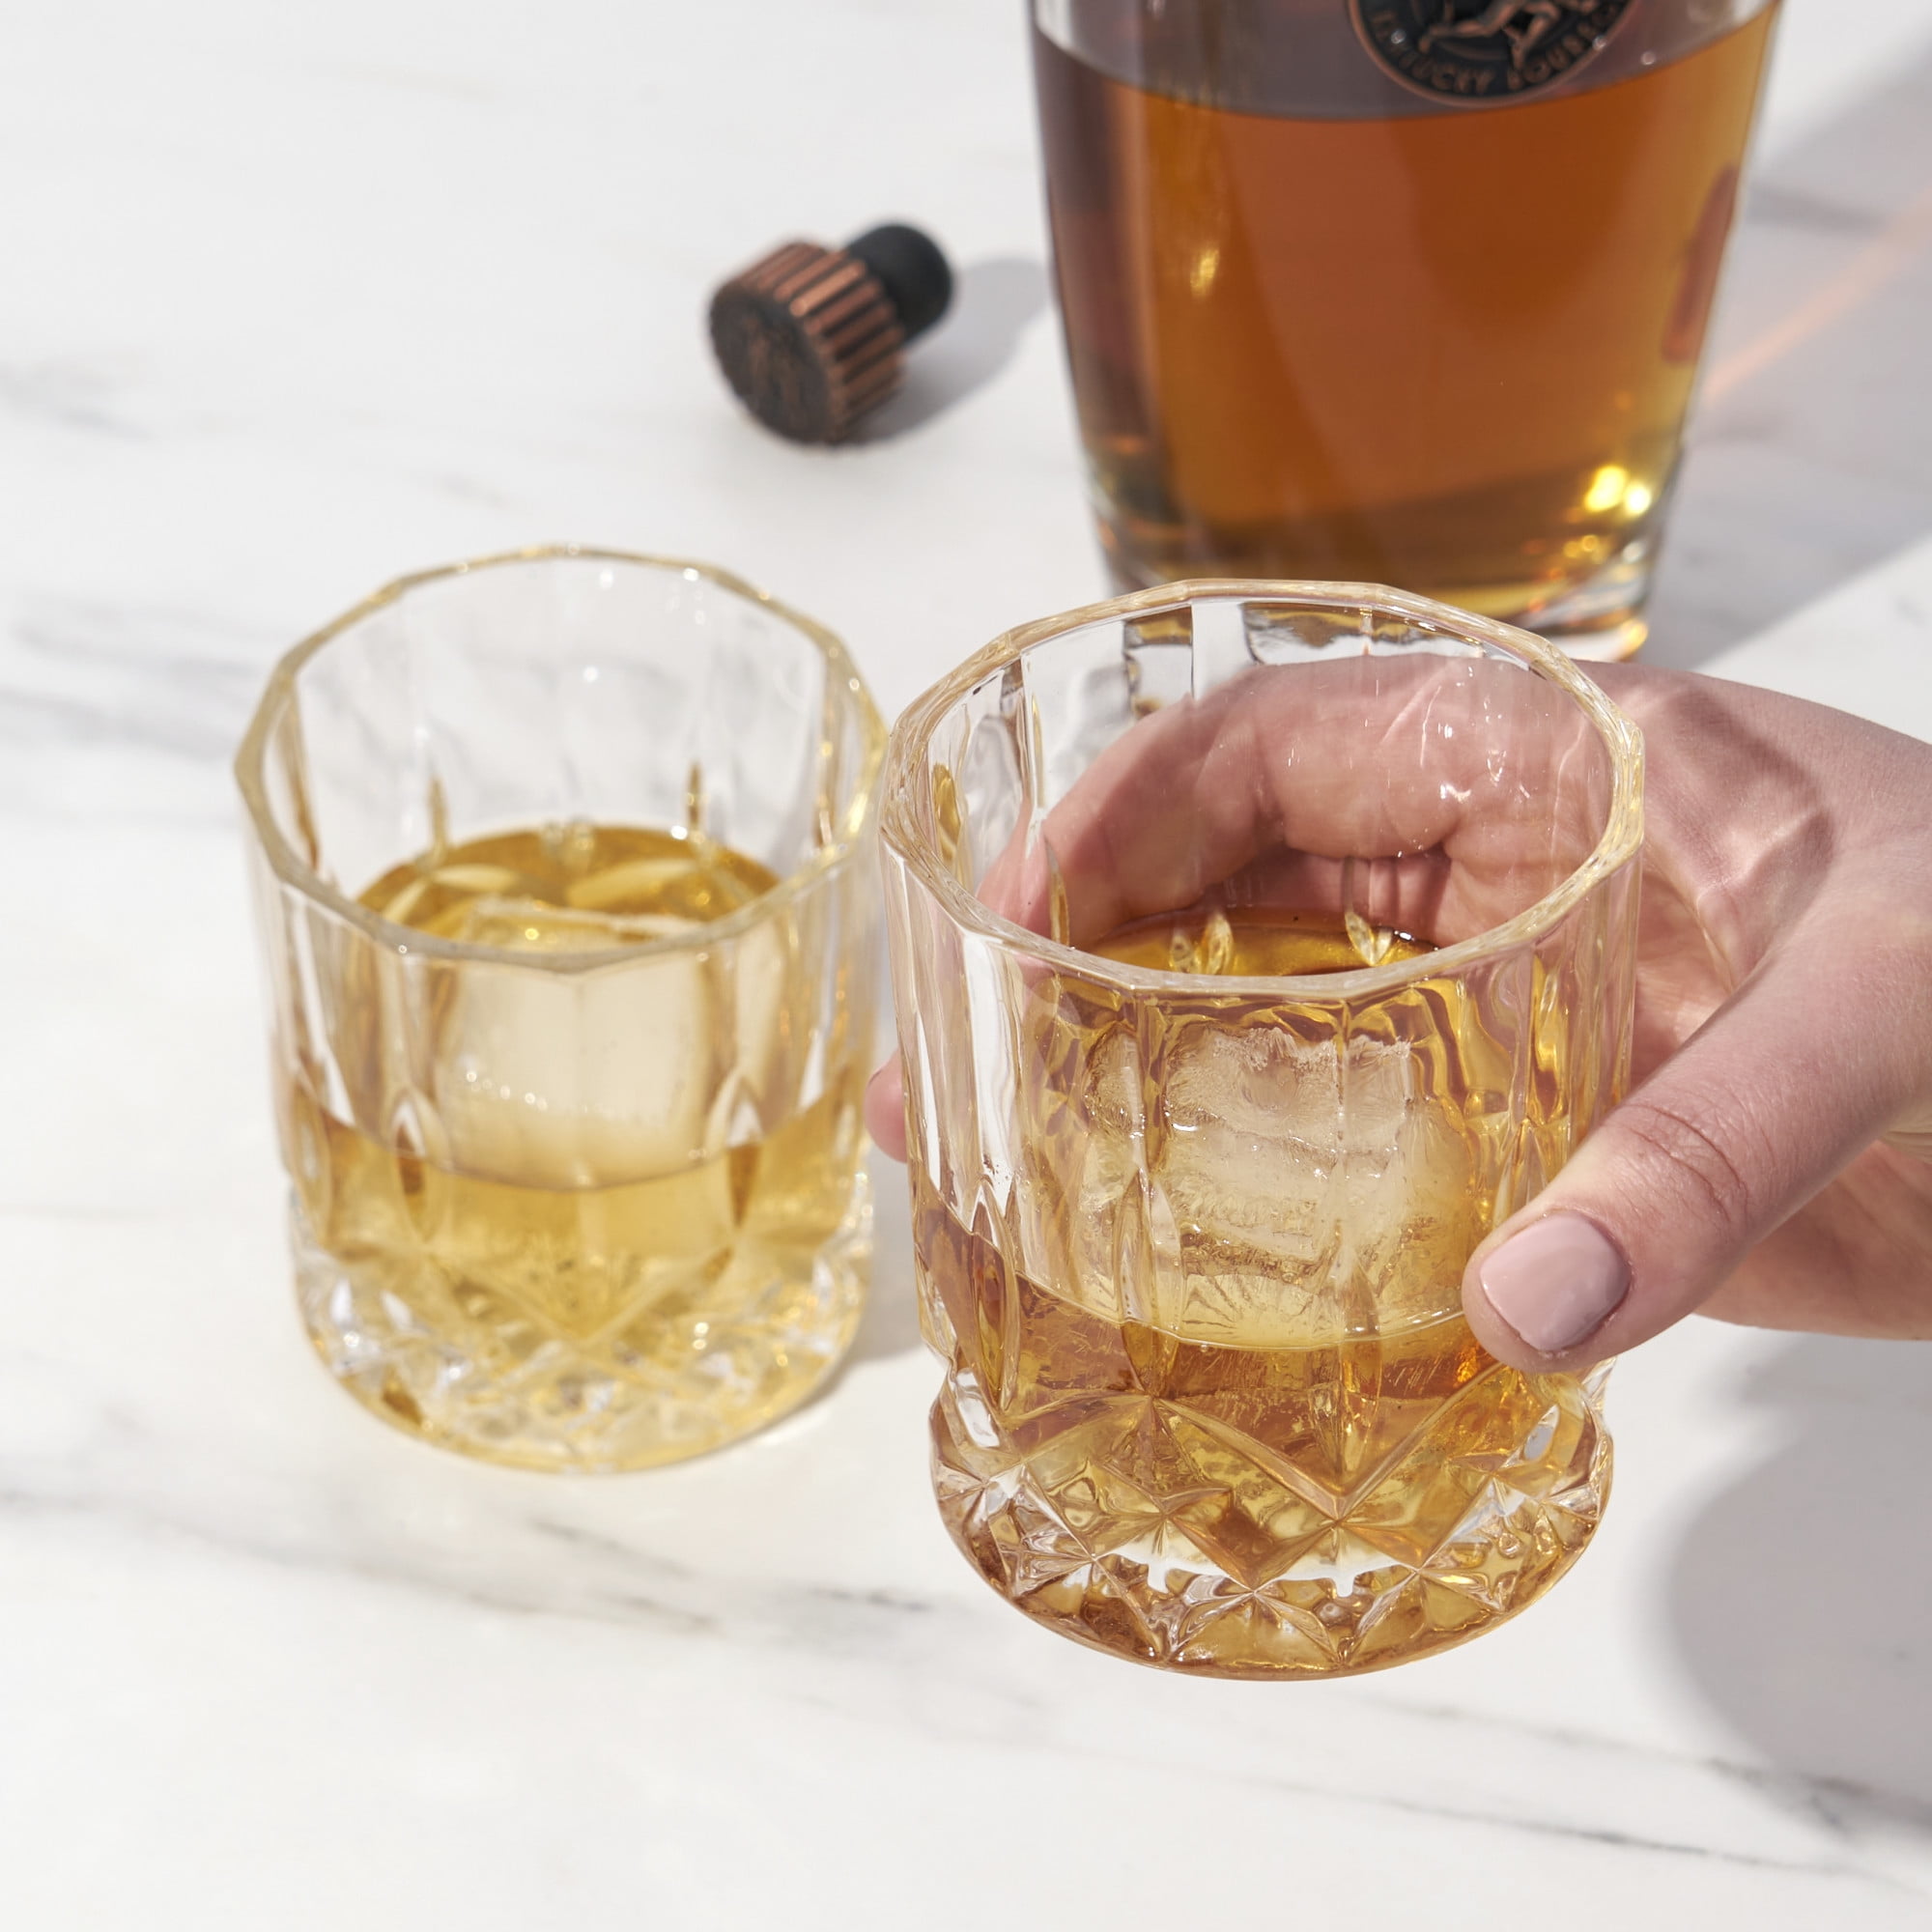 Alchemade Set of 2 Whiskey Glasses with Metallic Design - 16 oz Lowball for Cocktails, Old Fashioned, Manhattan, Bourbon, or Scotch - Stemless Wine